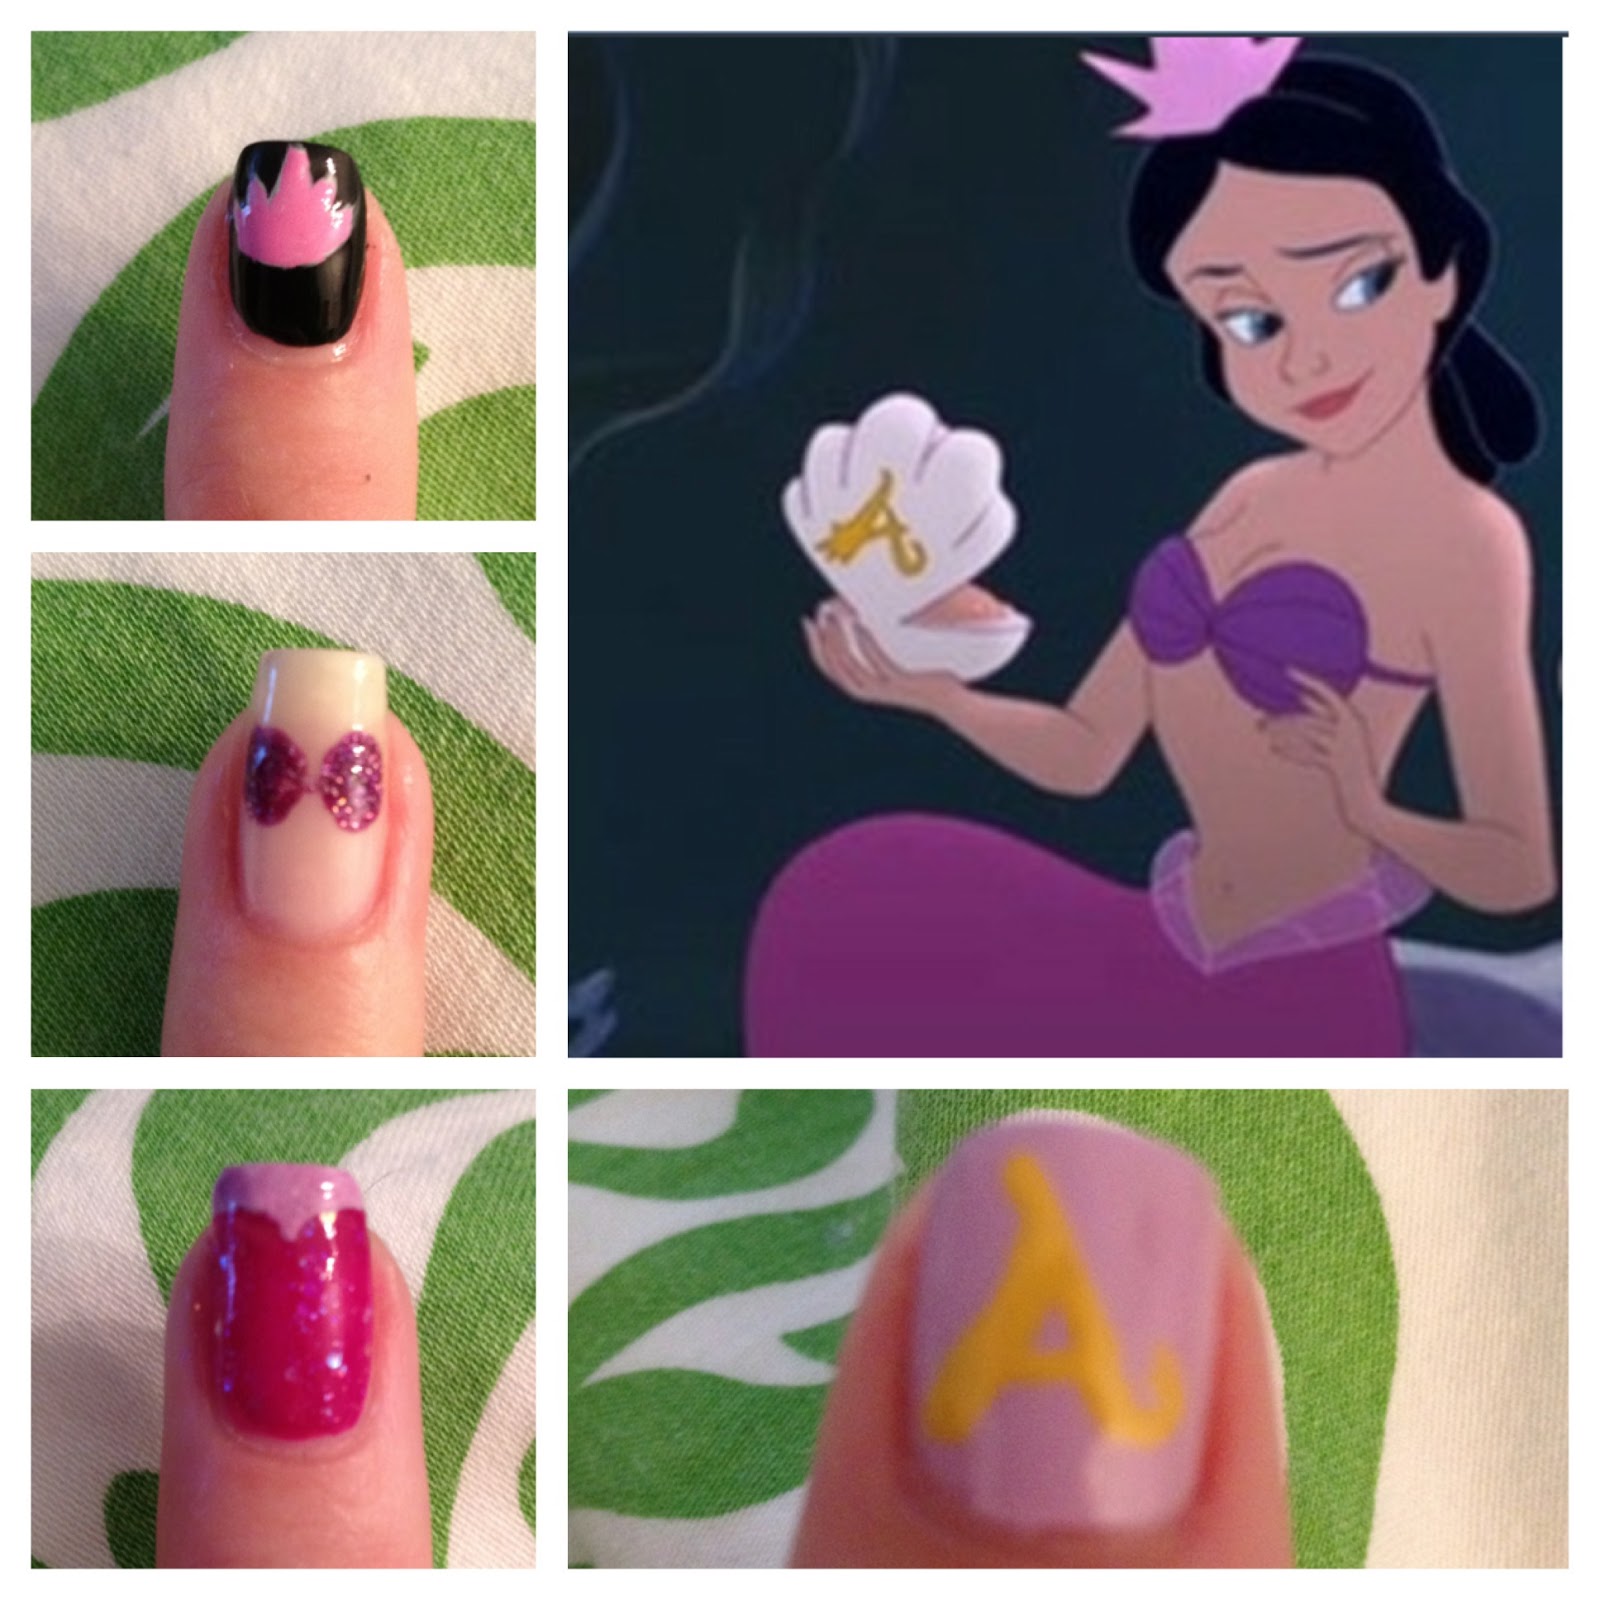 A Little Sparkle and Polish: Disney Nail Art Challenge Day 4: The Little  Mermaid